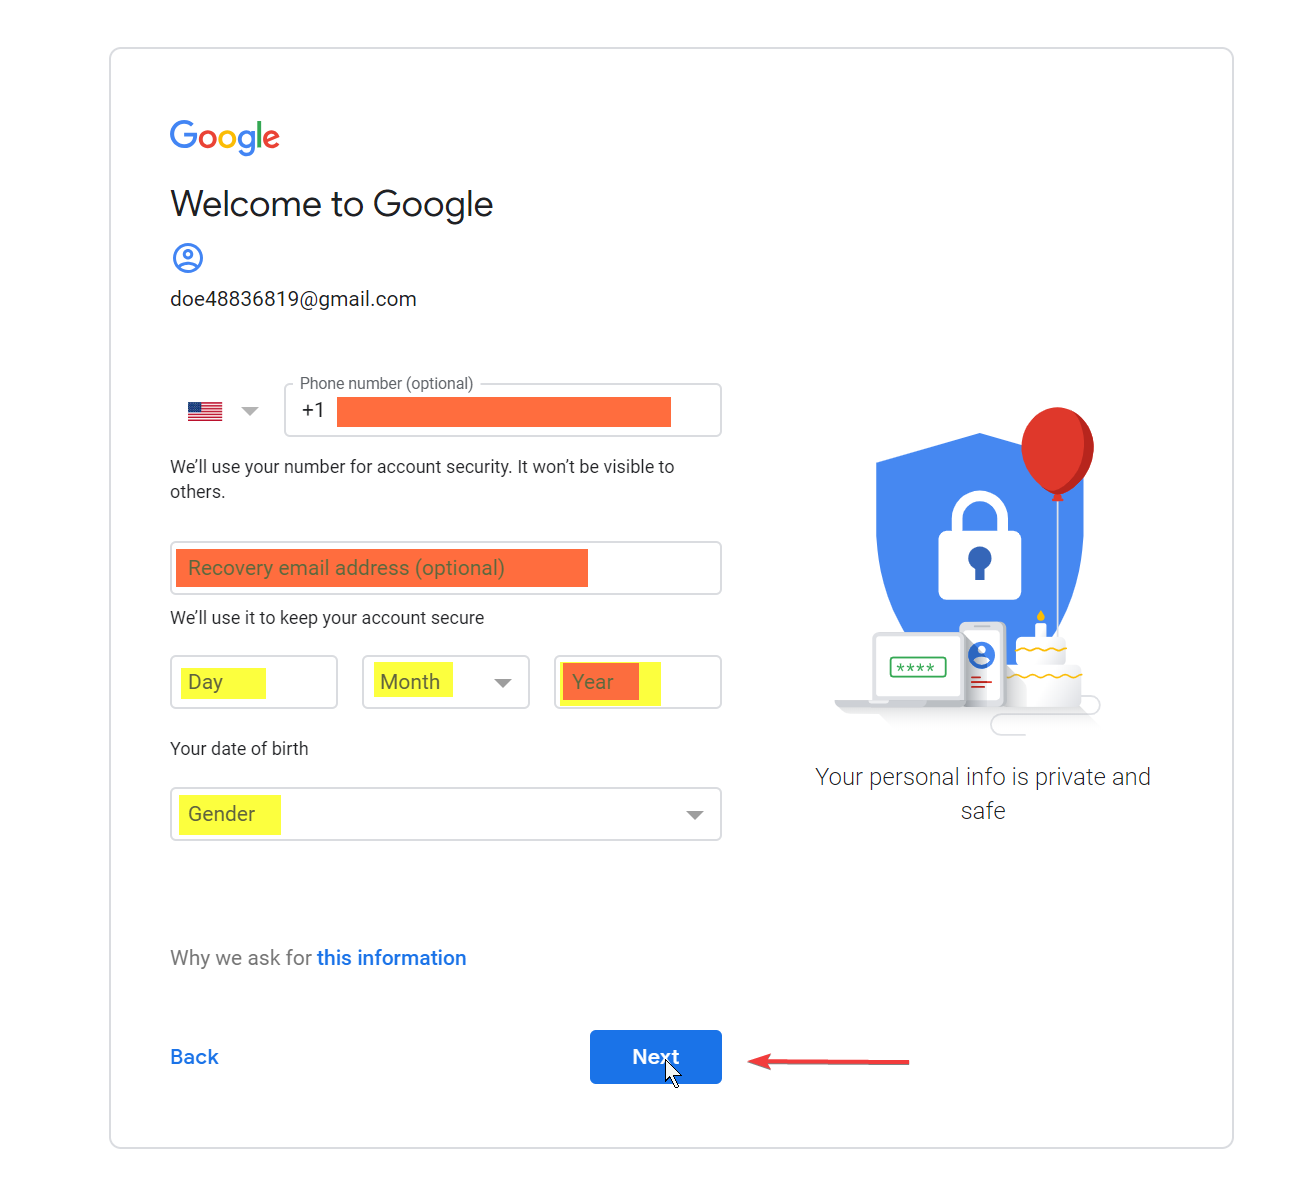 Enter details to create a Google account